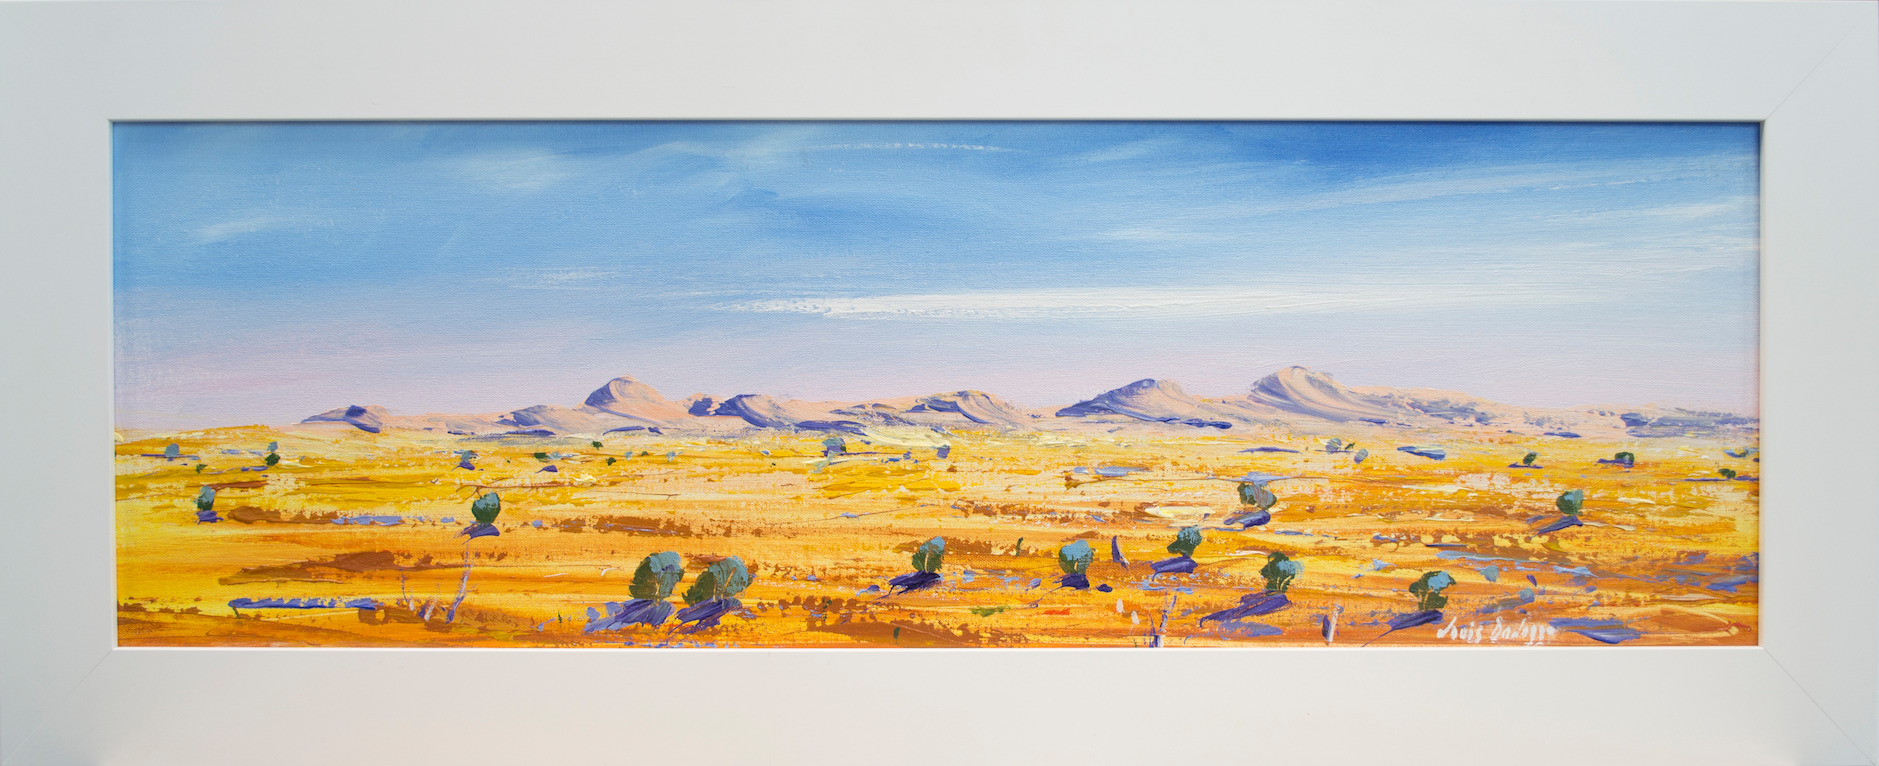 Framed Front View Of Landscape Painting "East Mac Donnell Ranges Central Australia" By Louis Dalozzo